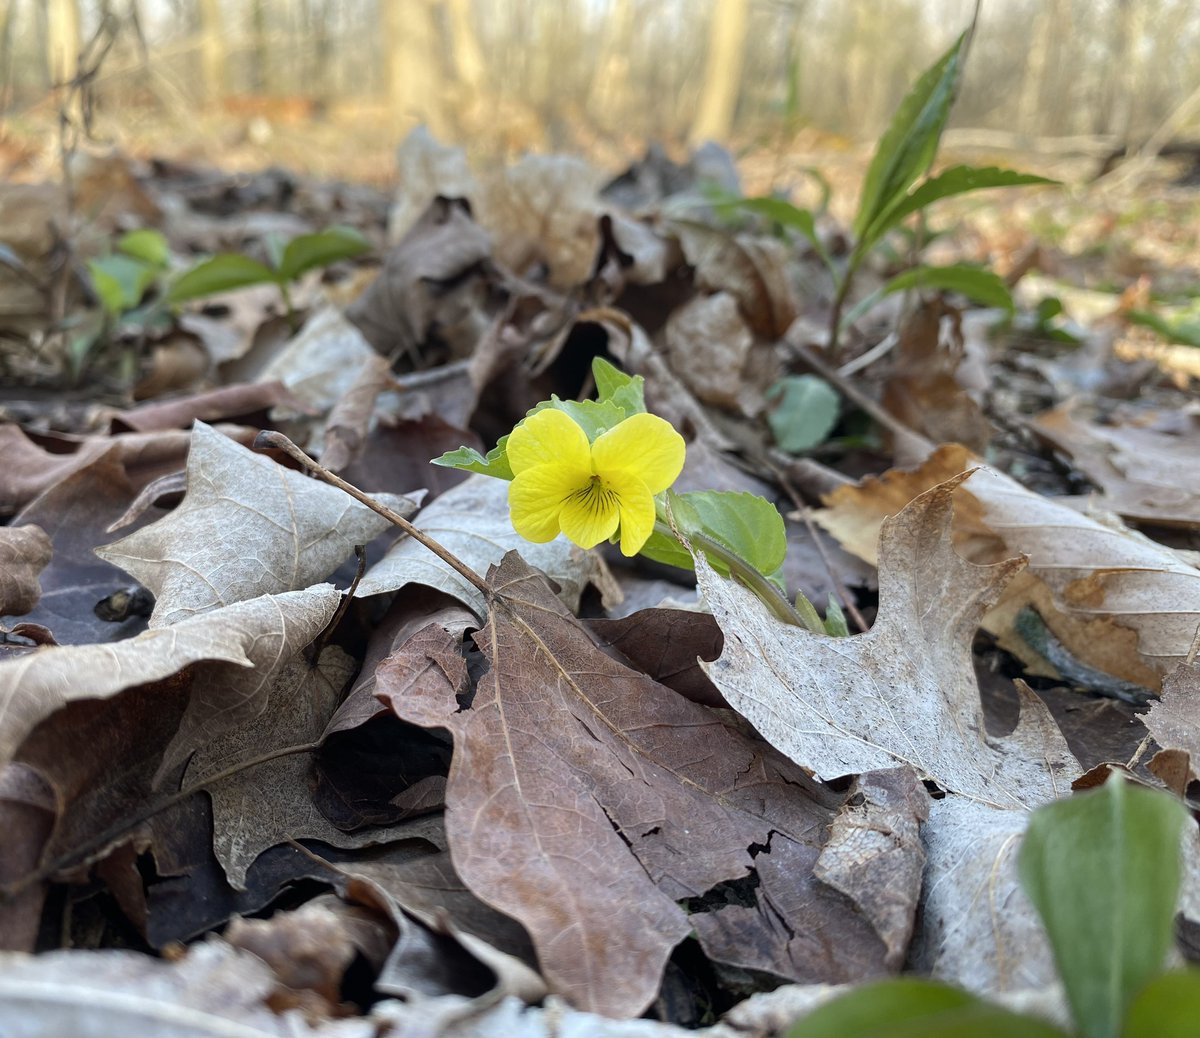 Downy Yellow Violets are blooming along Spicebush Trail! 🌸 #visitck #spring [Image: Small yellow flower blooms amongst dry leaves.]